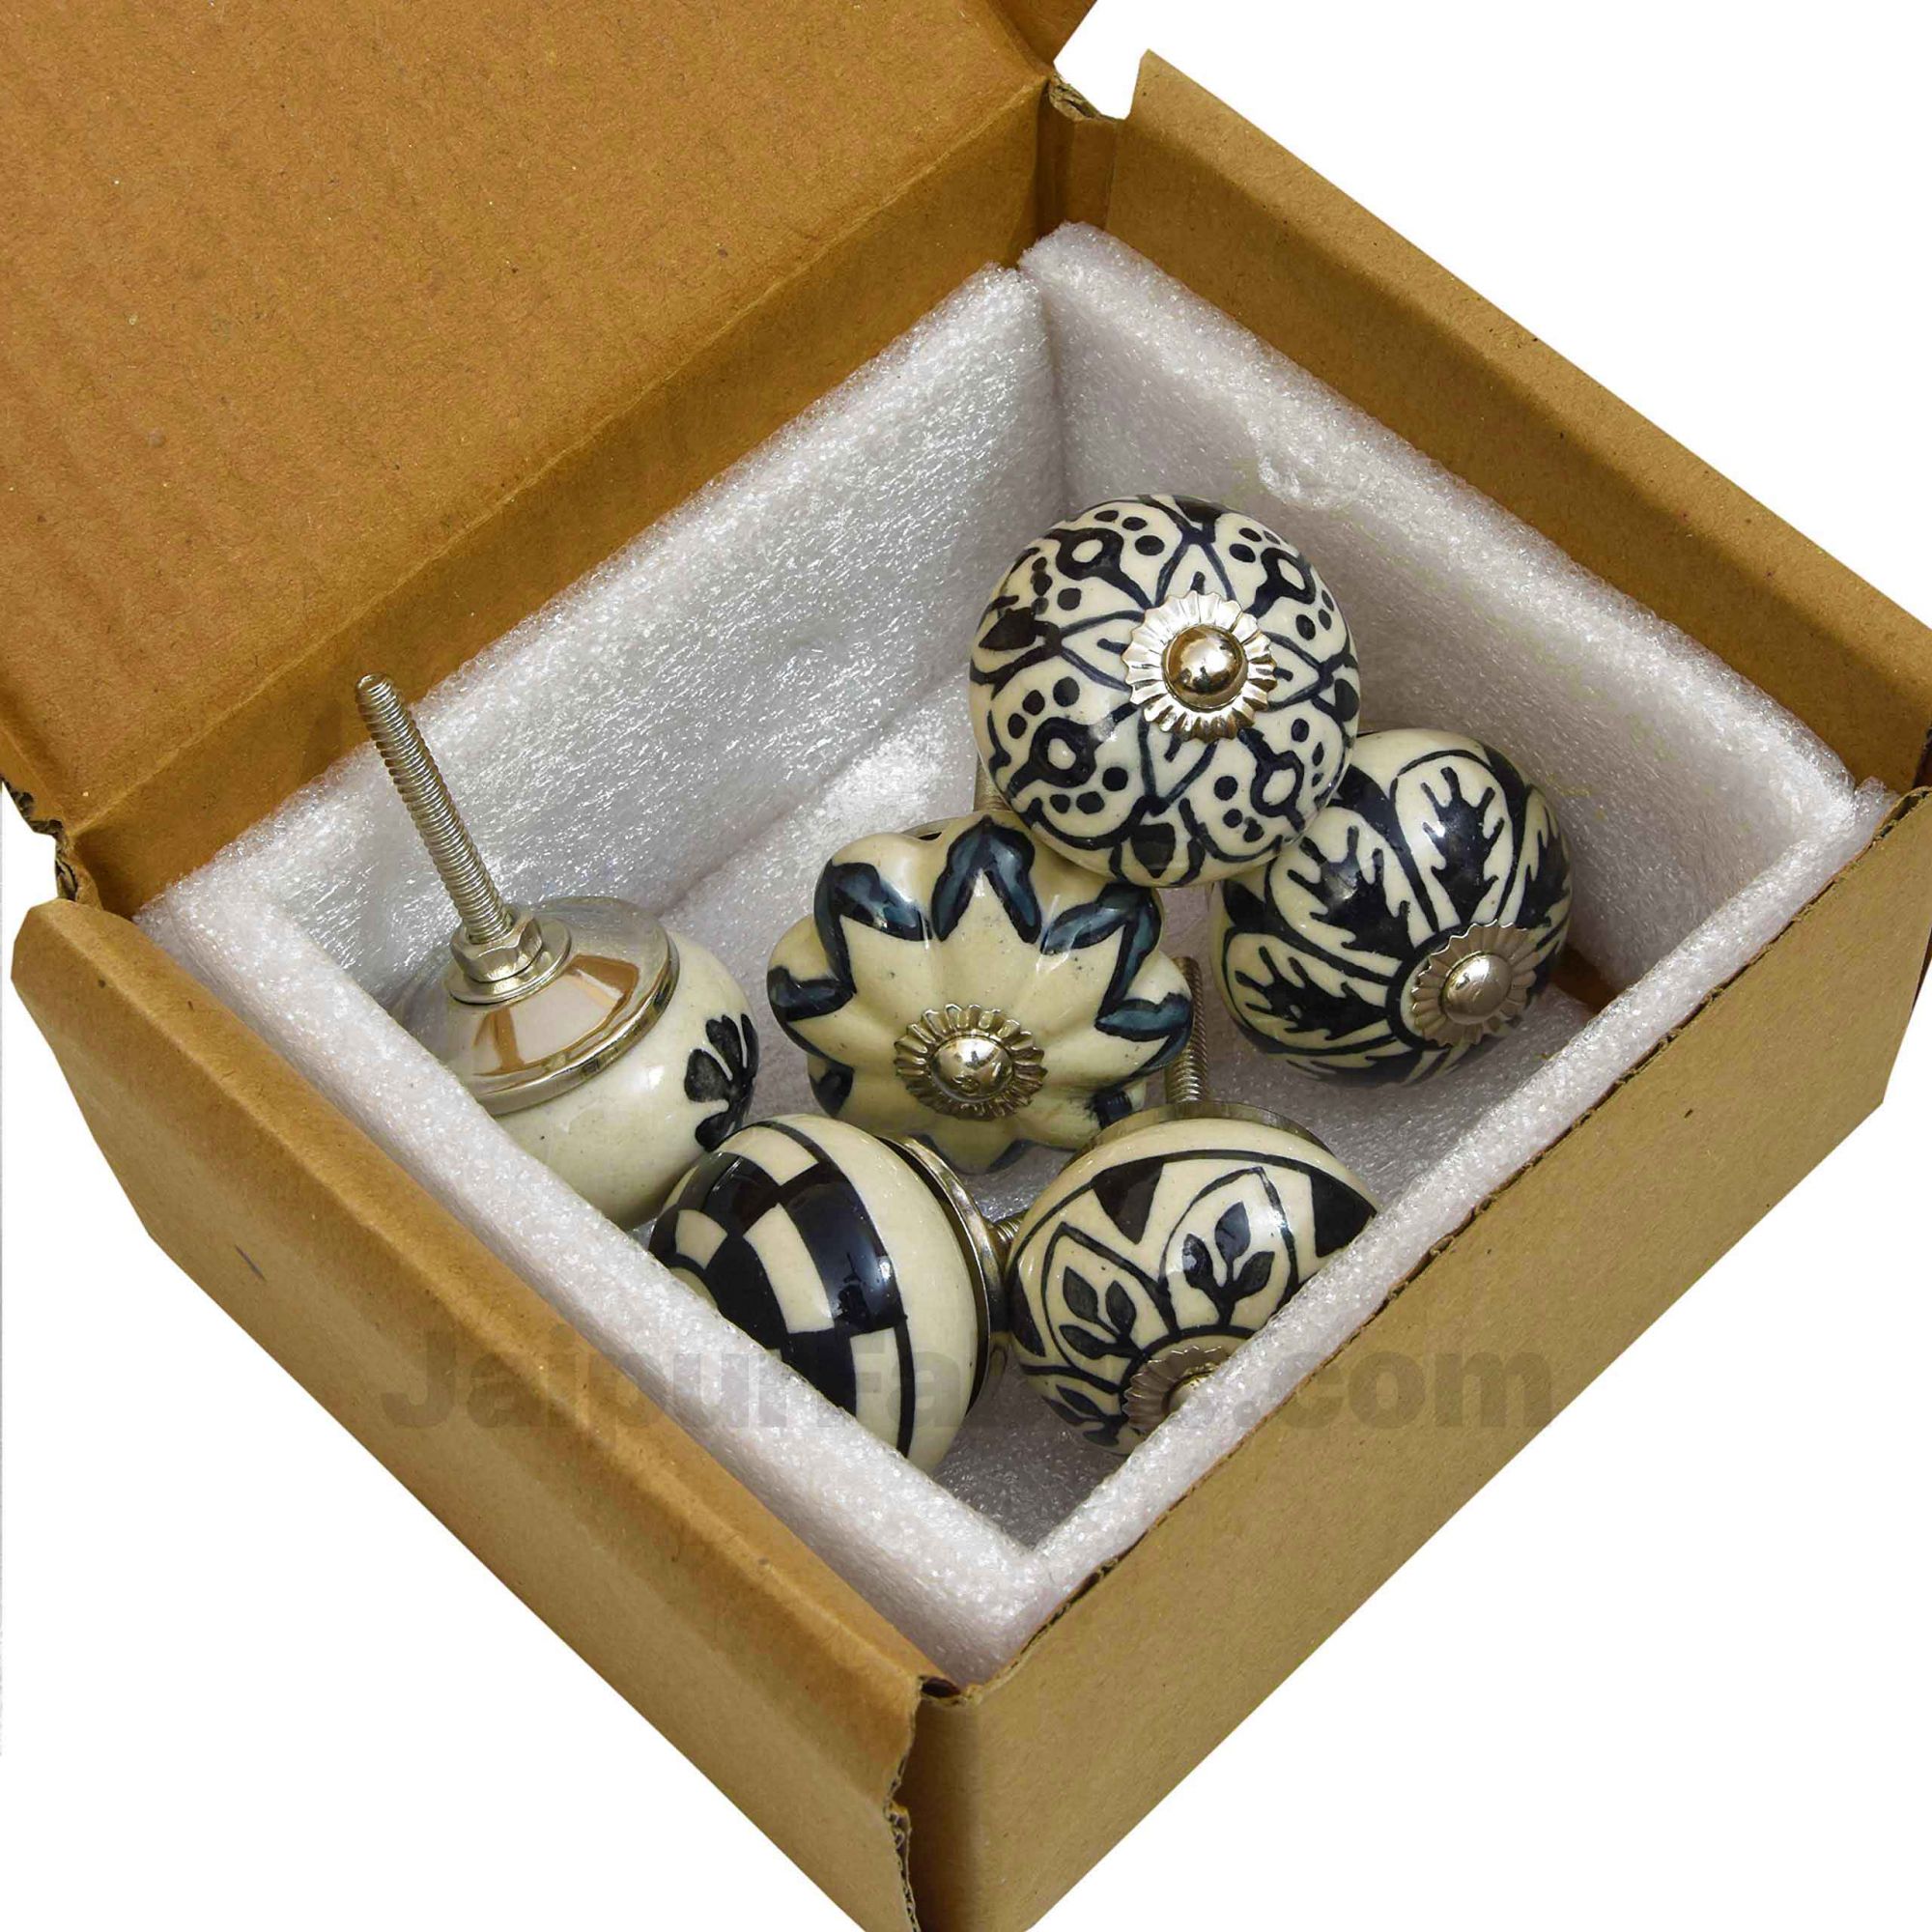 Black & White Set of 6 Pcs Fabricated Knobs for Doors and Cabinets with Brass Blue Pottery